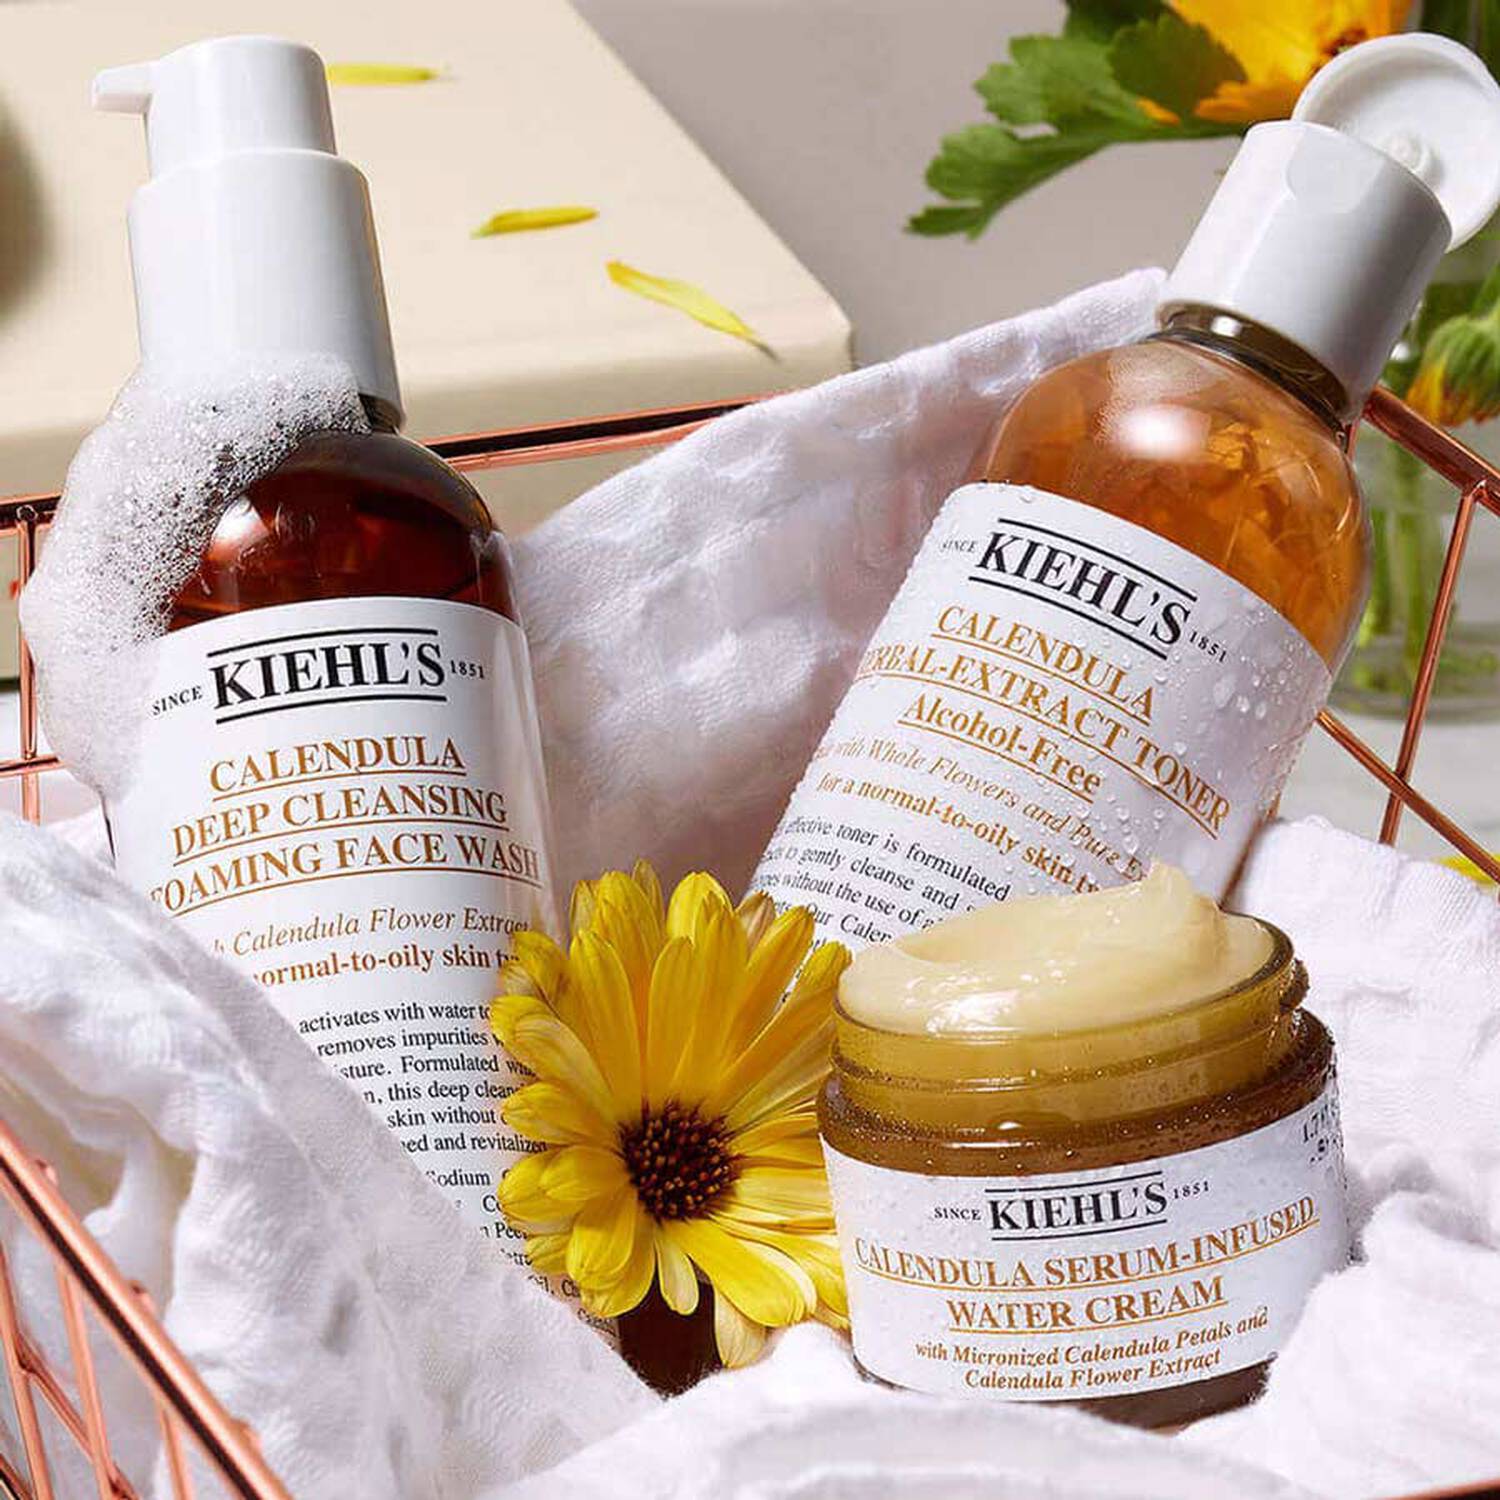 Kiehl's Calendula Deep Cleansing Foaming Face Wash – The Shop at